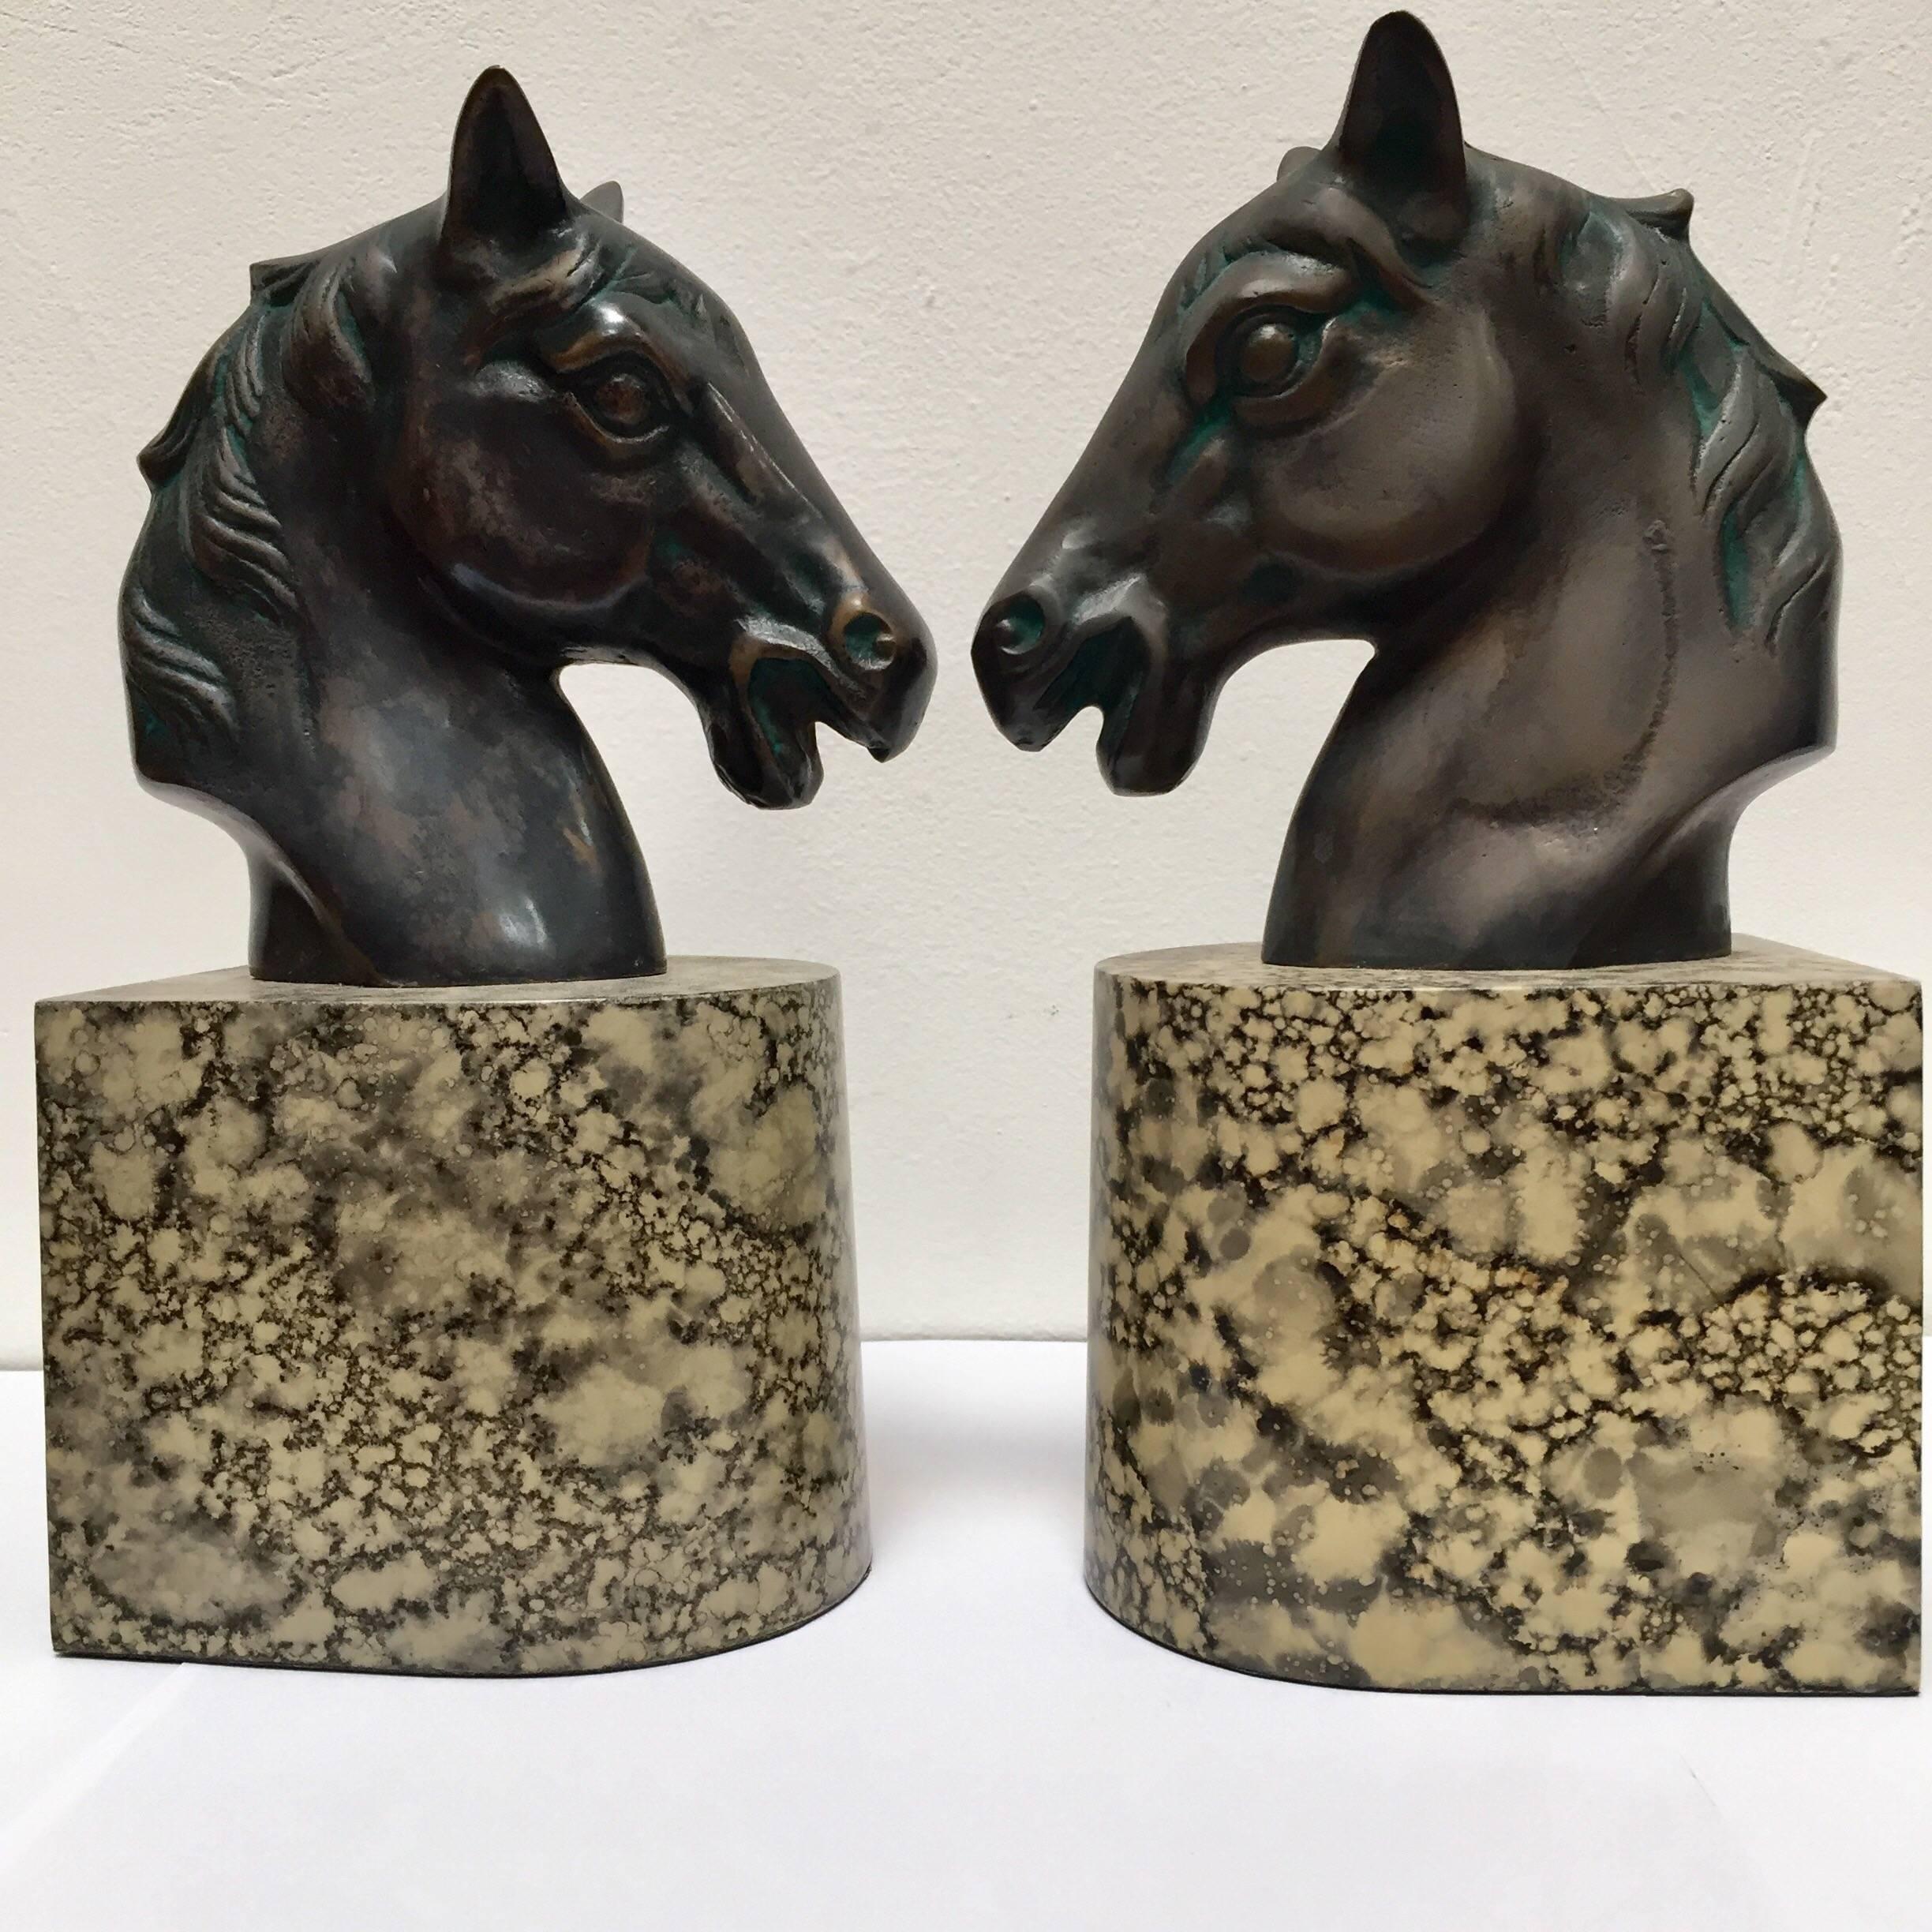 Modern Cast Bronze Sculptures of Black Horses Bust Bookends on Stand 